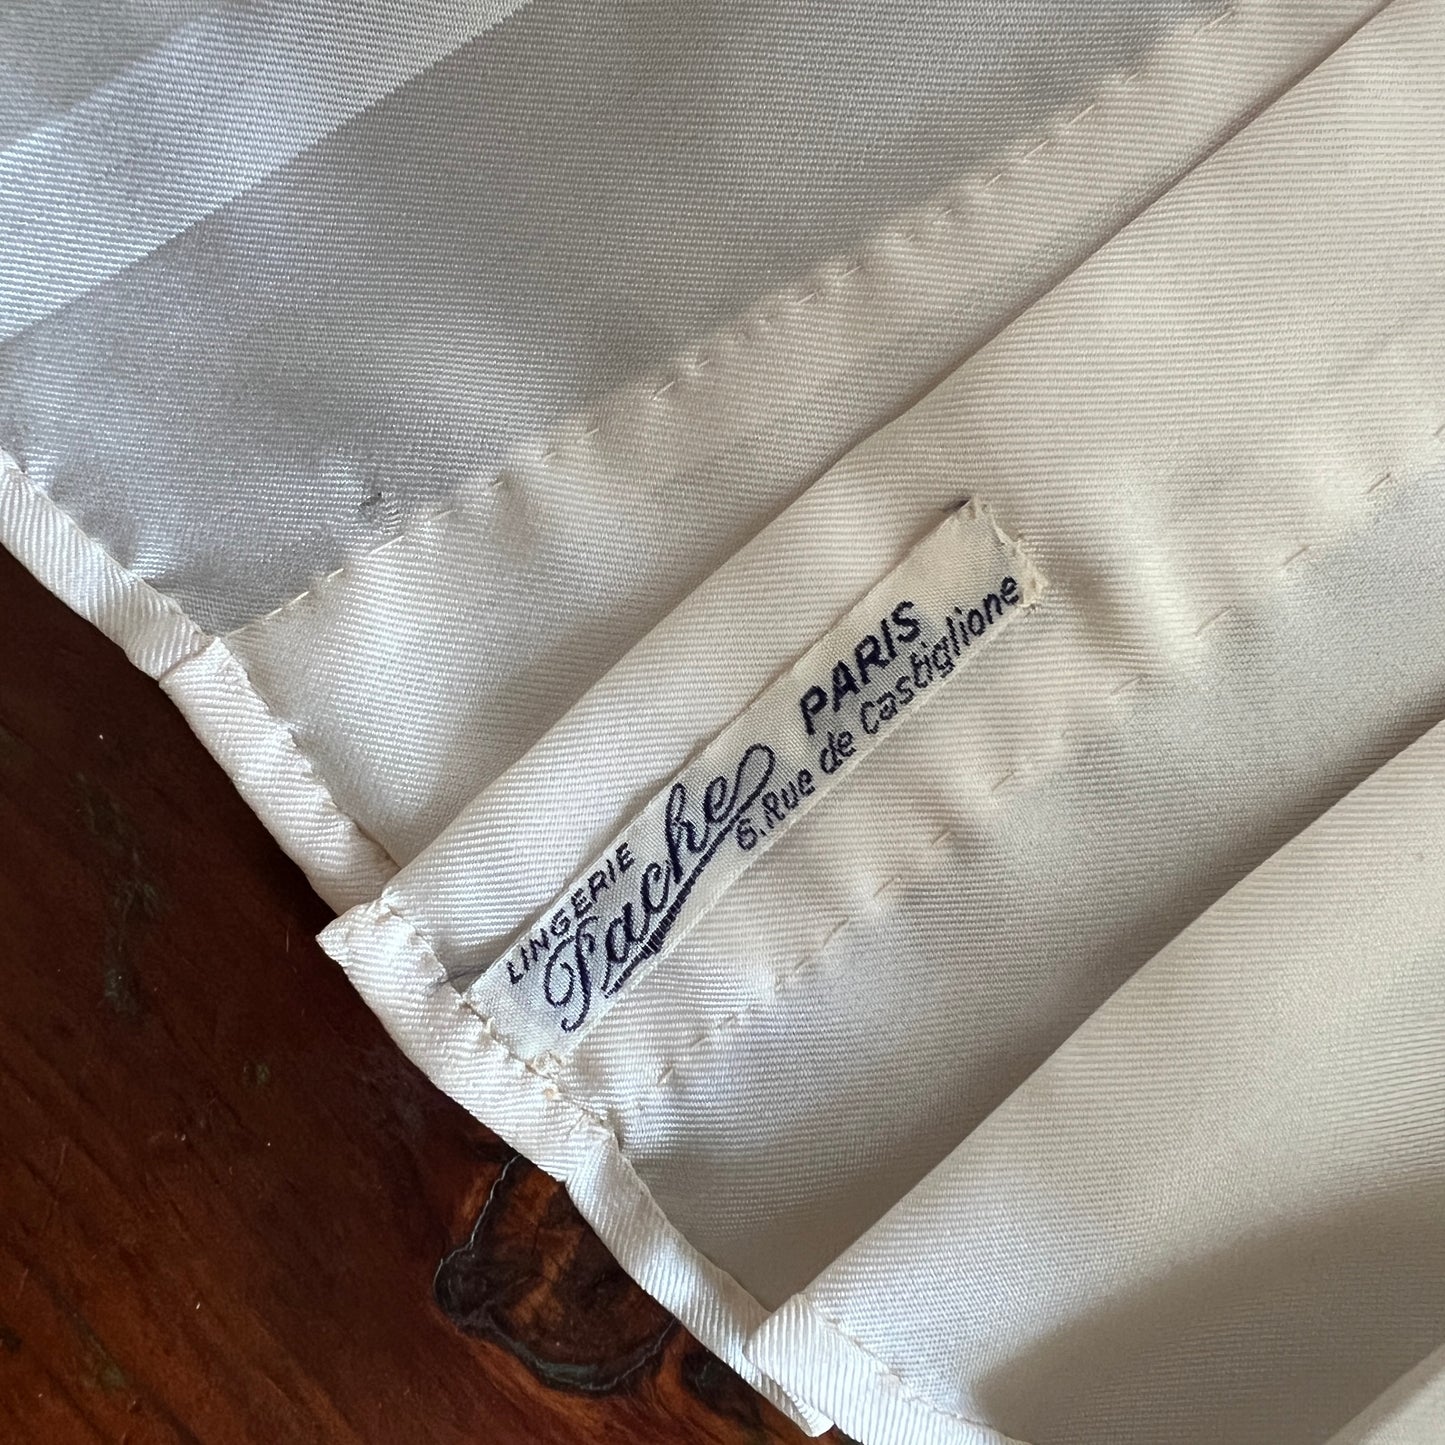 30s/40s French Embroidered Blouse